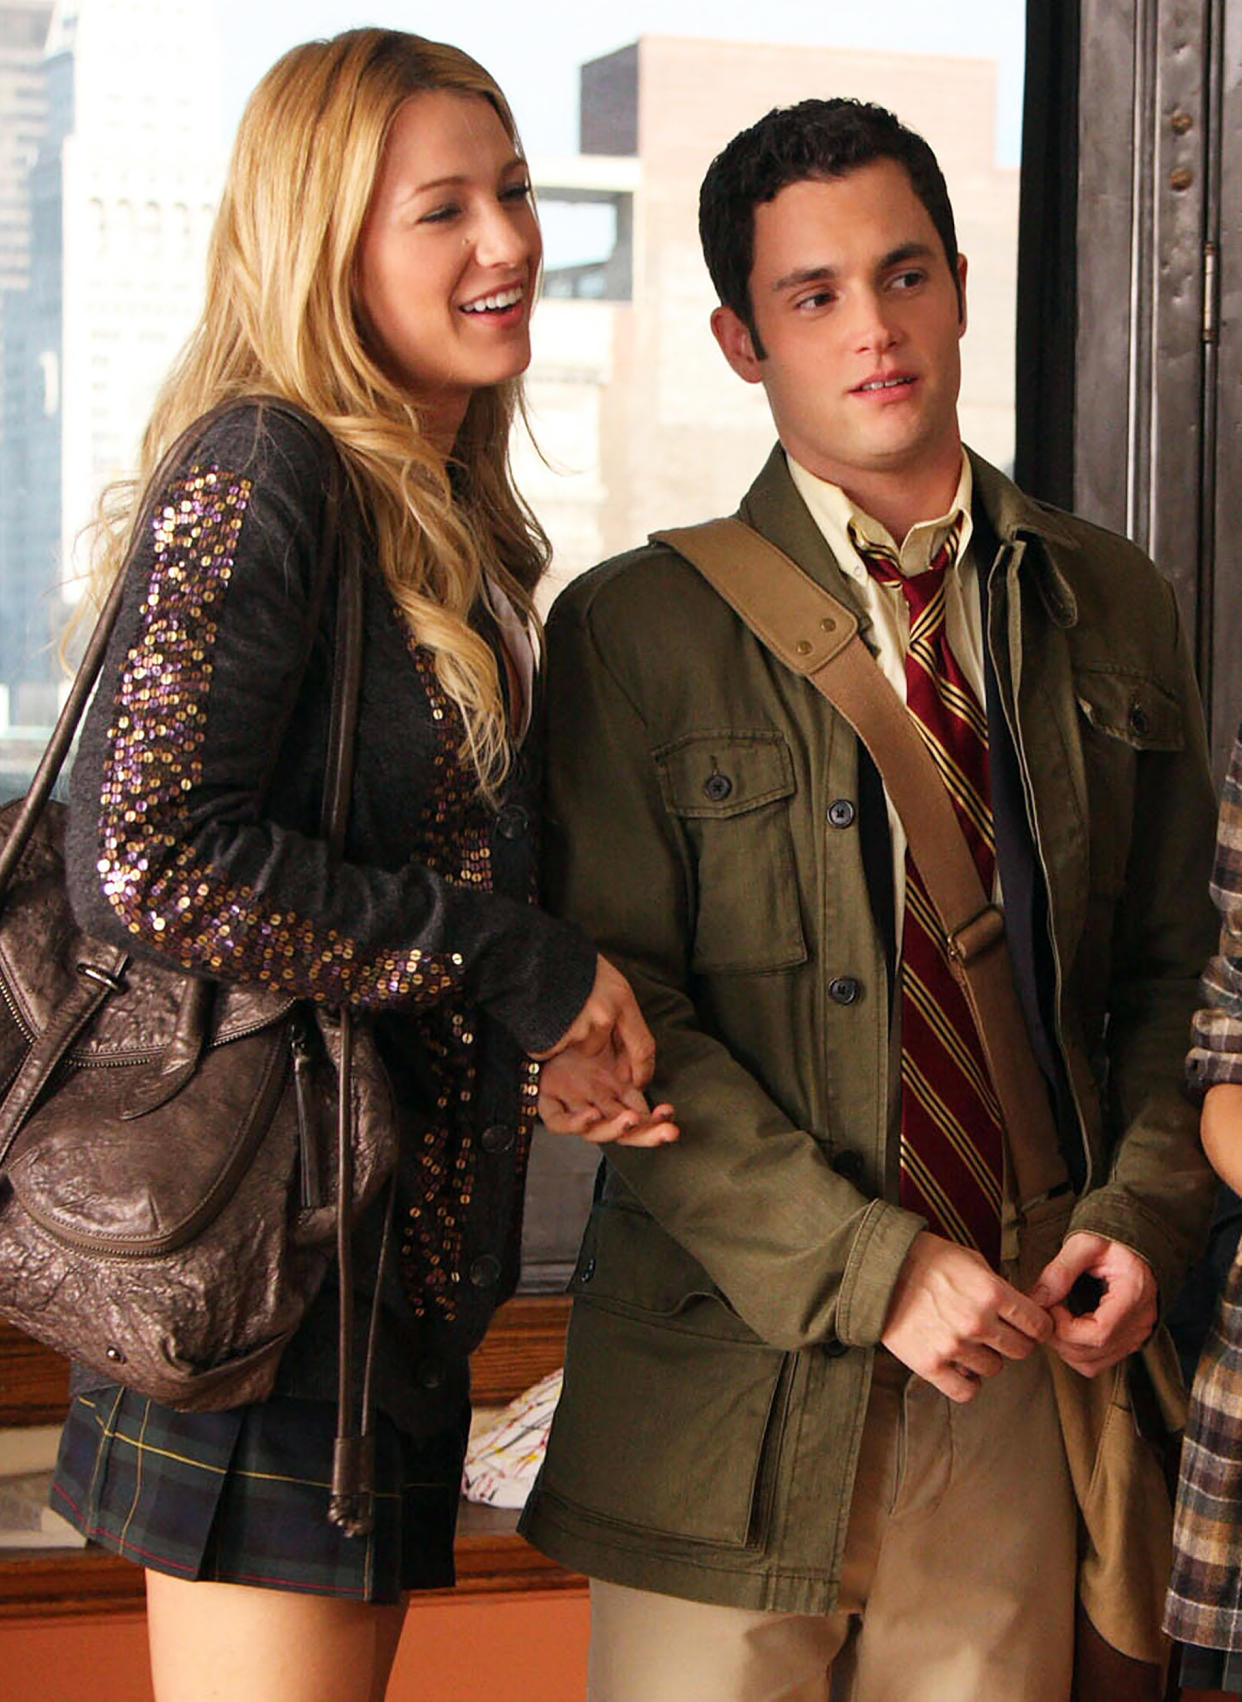 Blake Lively and Penn Badgley in 